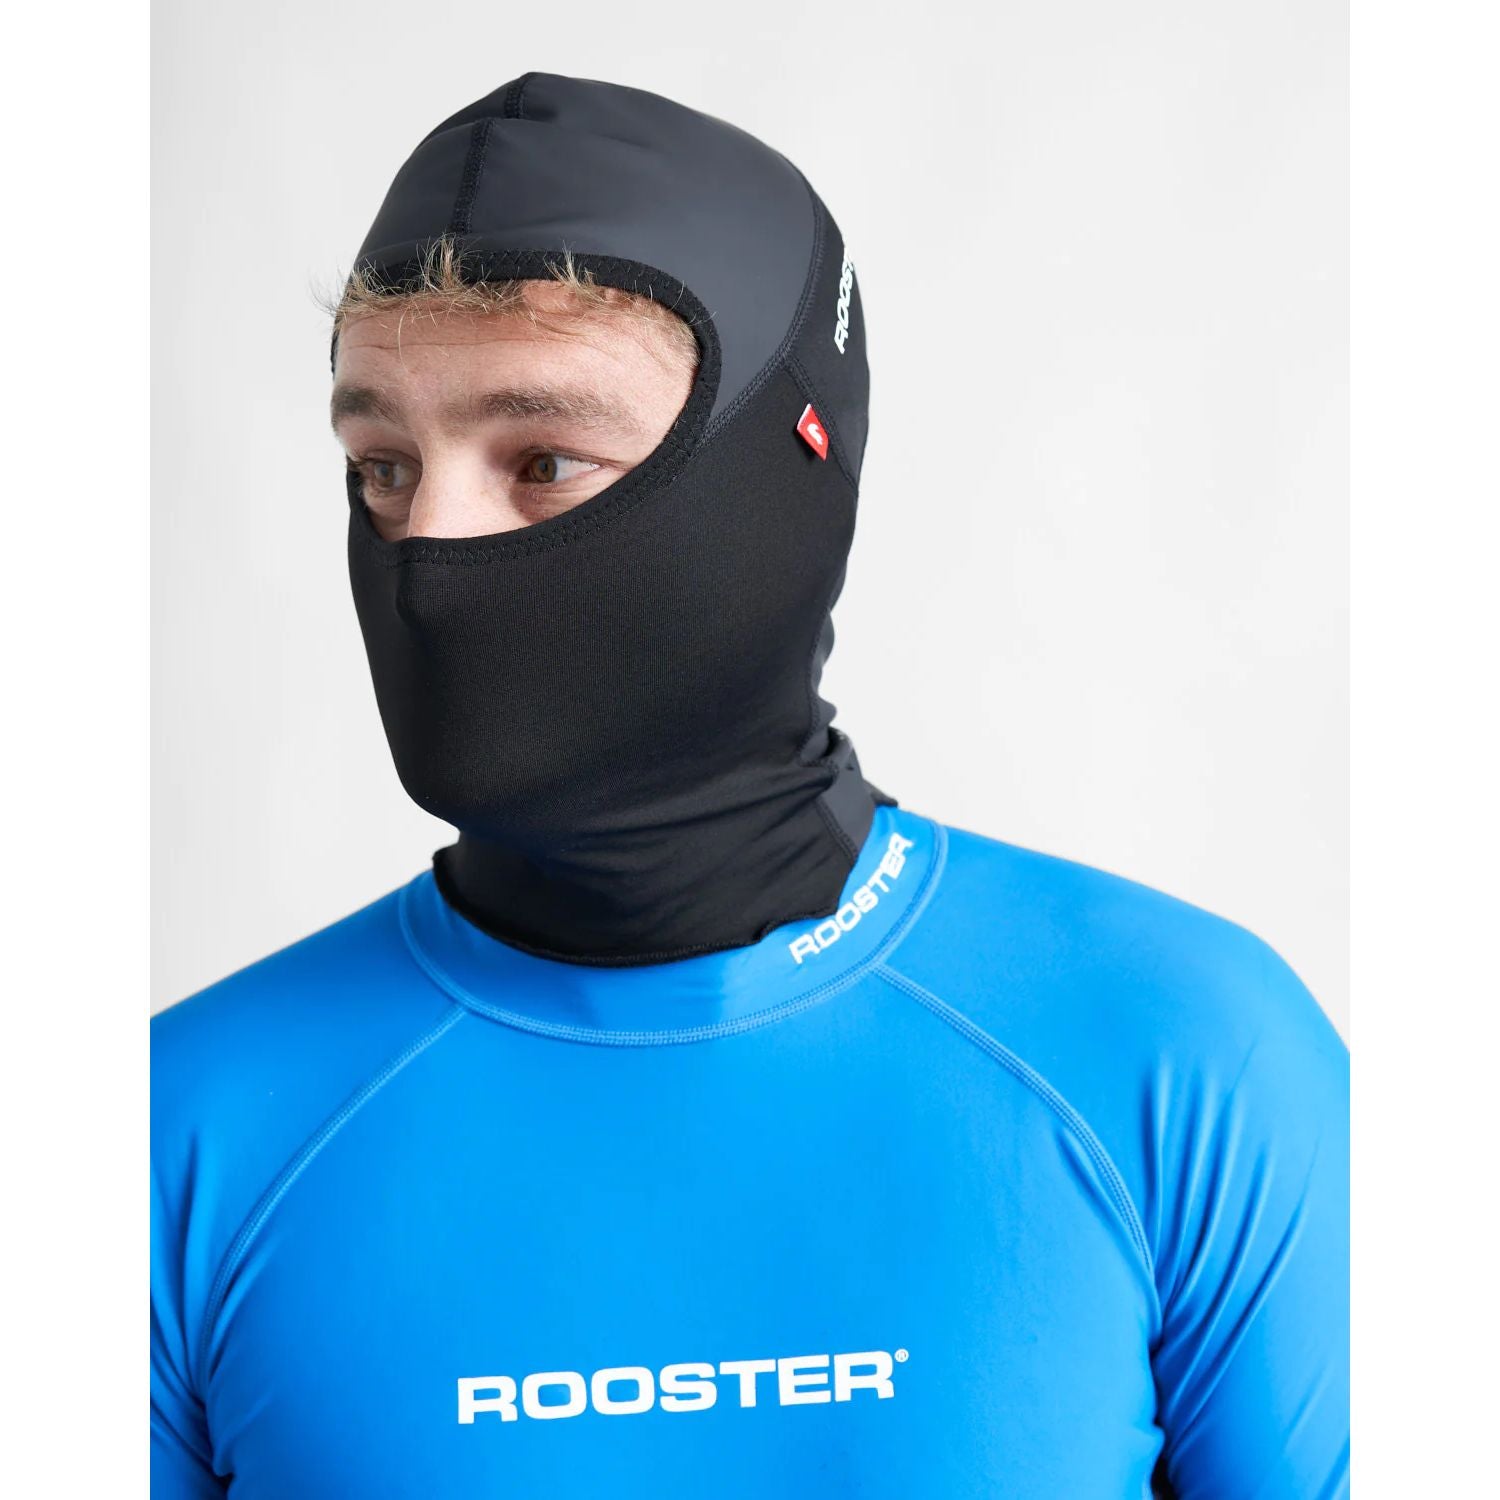 Rooster PolyPro Balaclava